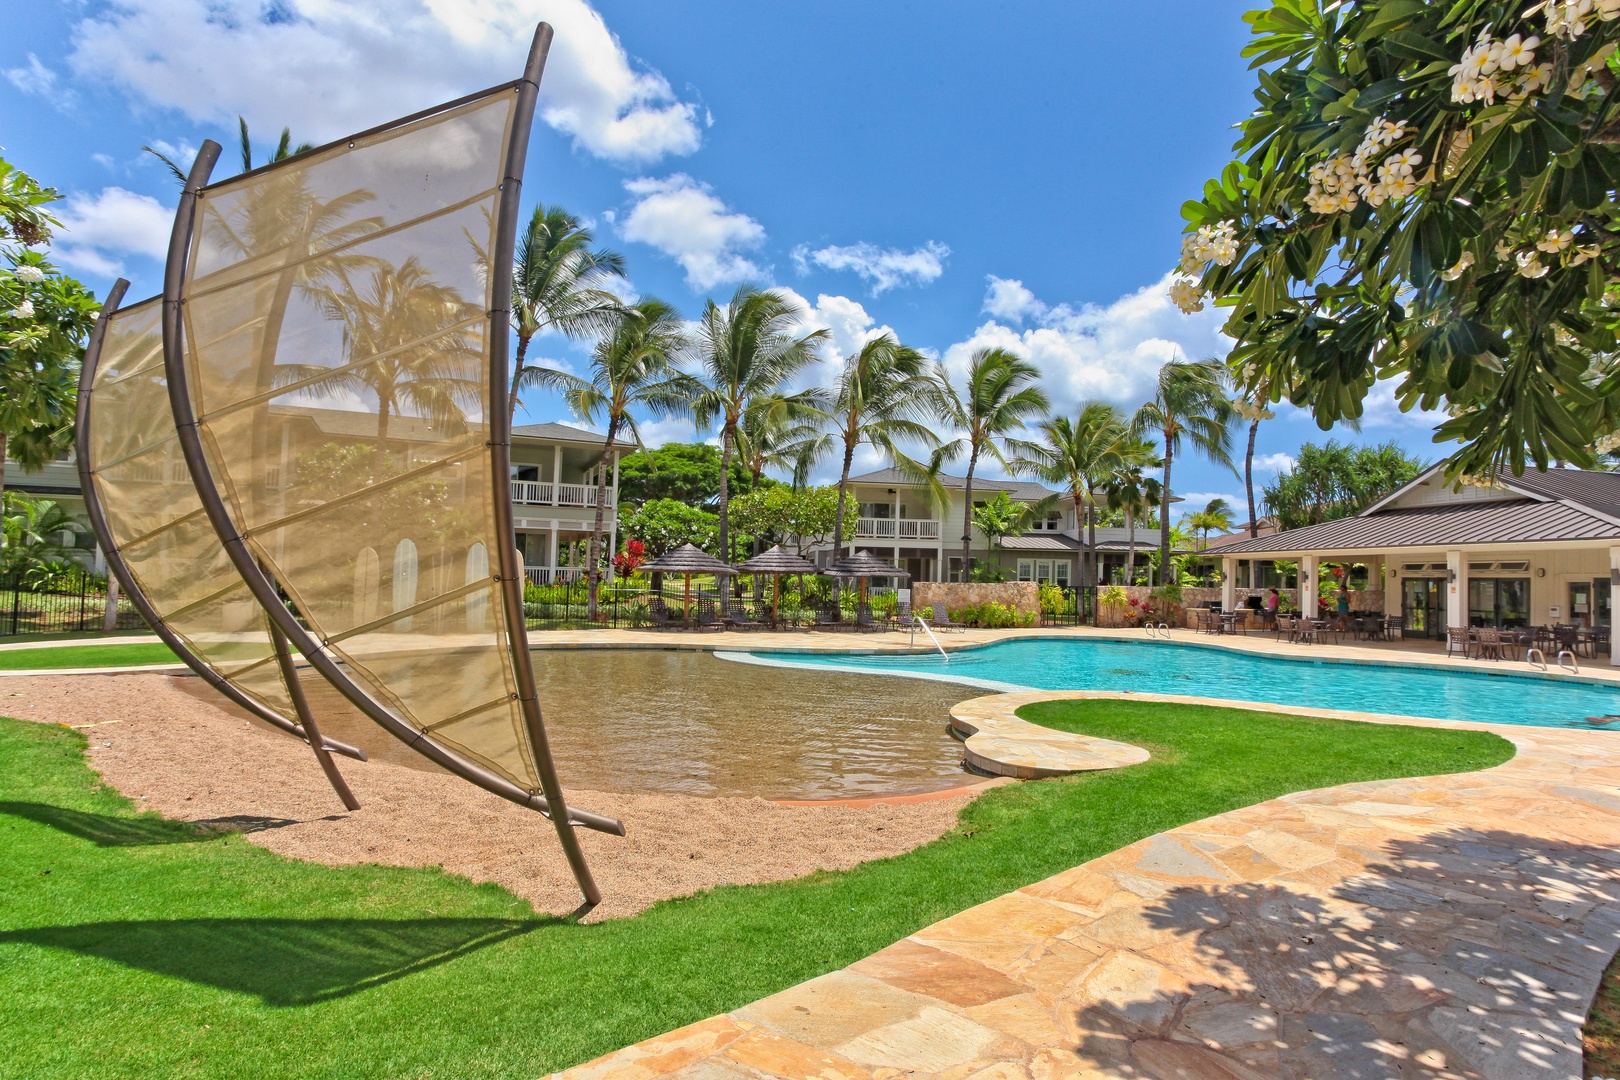 Kapolei Vacation Rentals, Coconut Plantation 1110-3 - Go for a swim in the sparkling waters and rest in the lounge chairs.